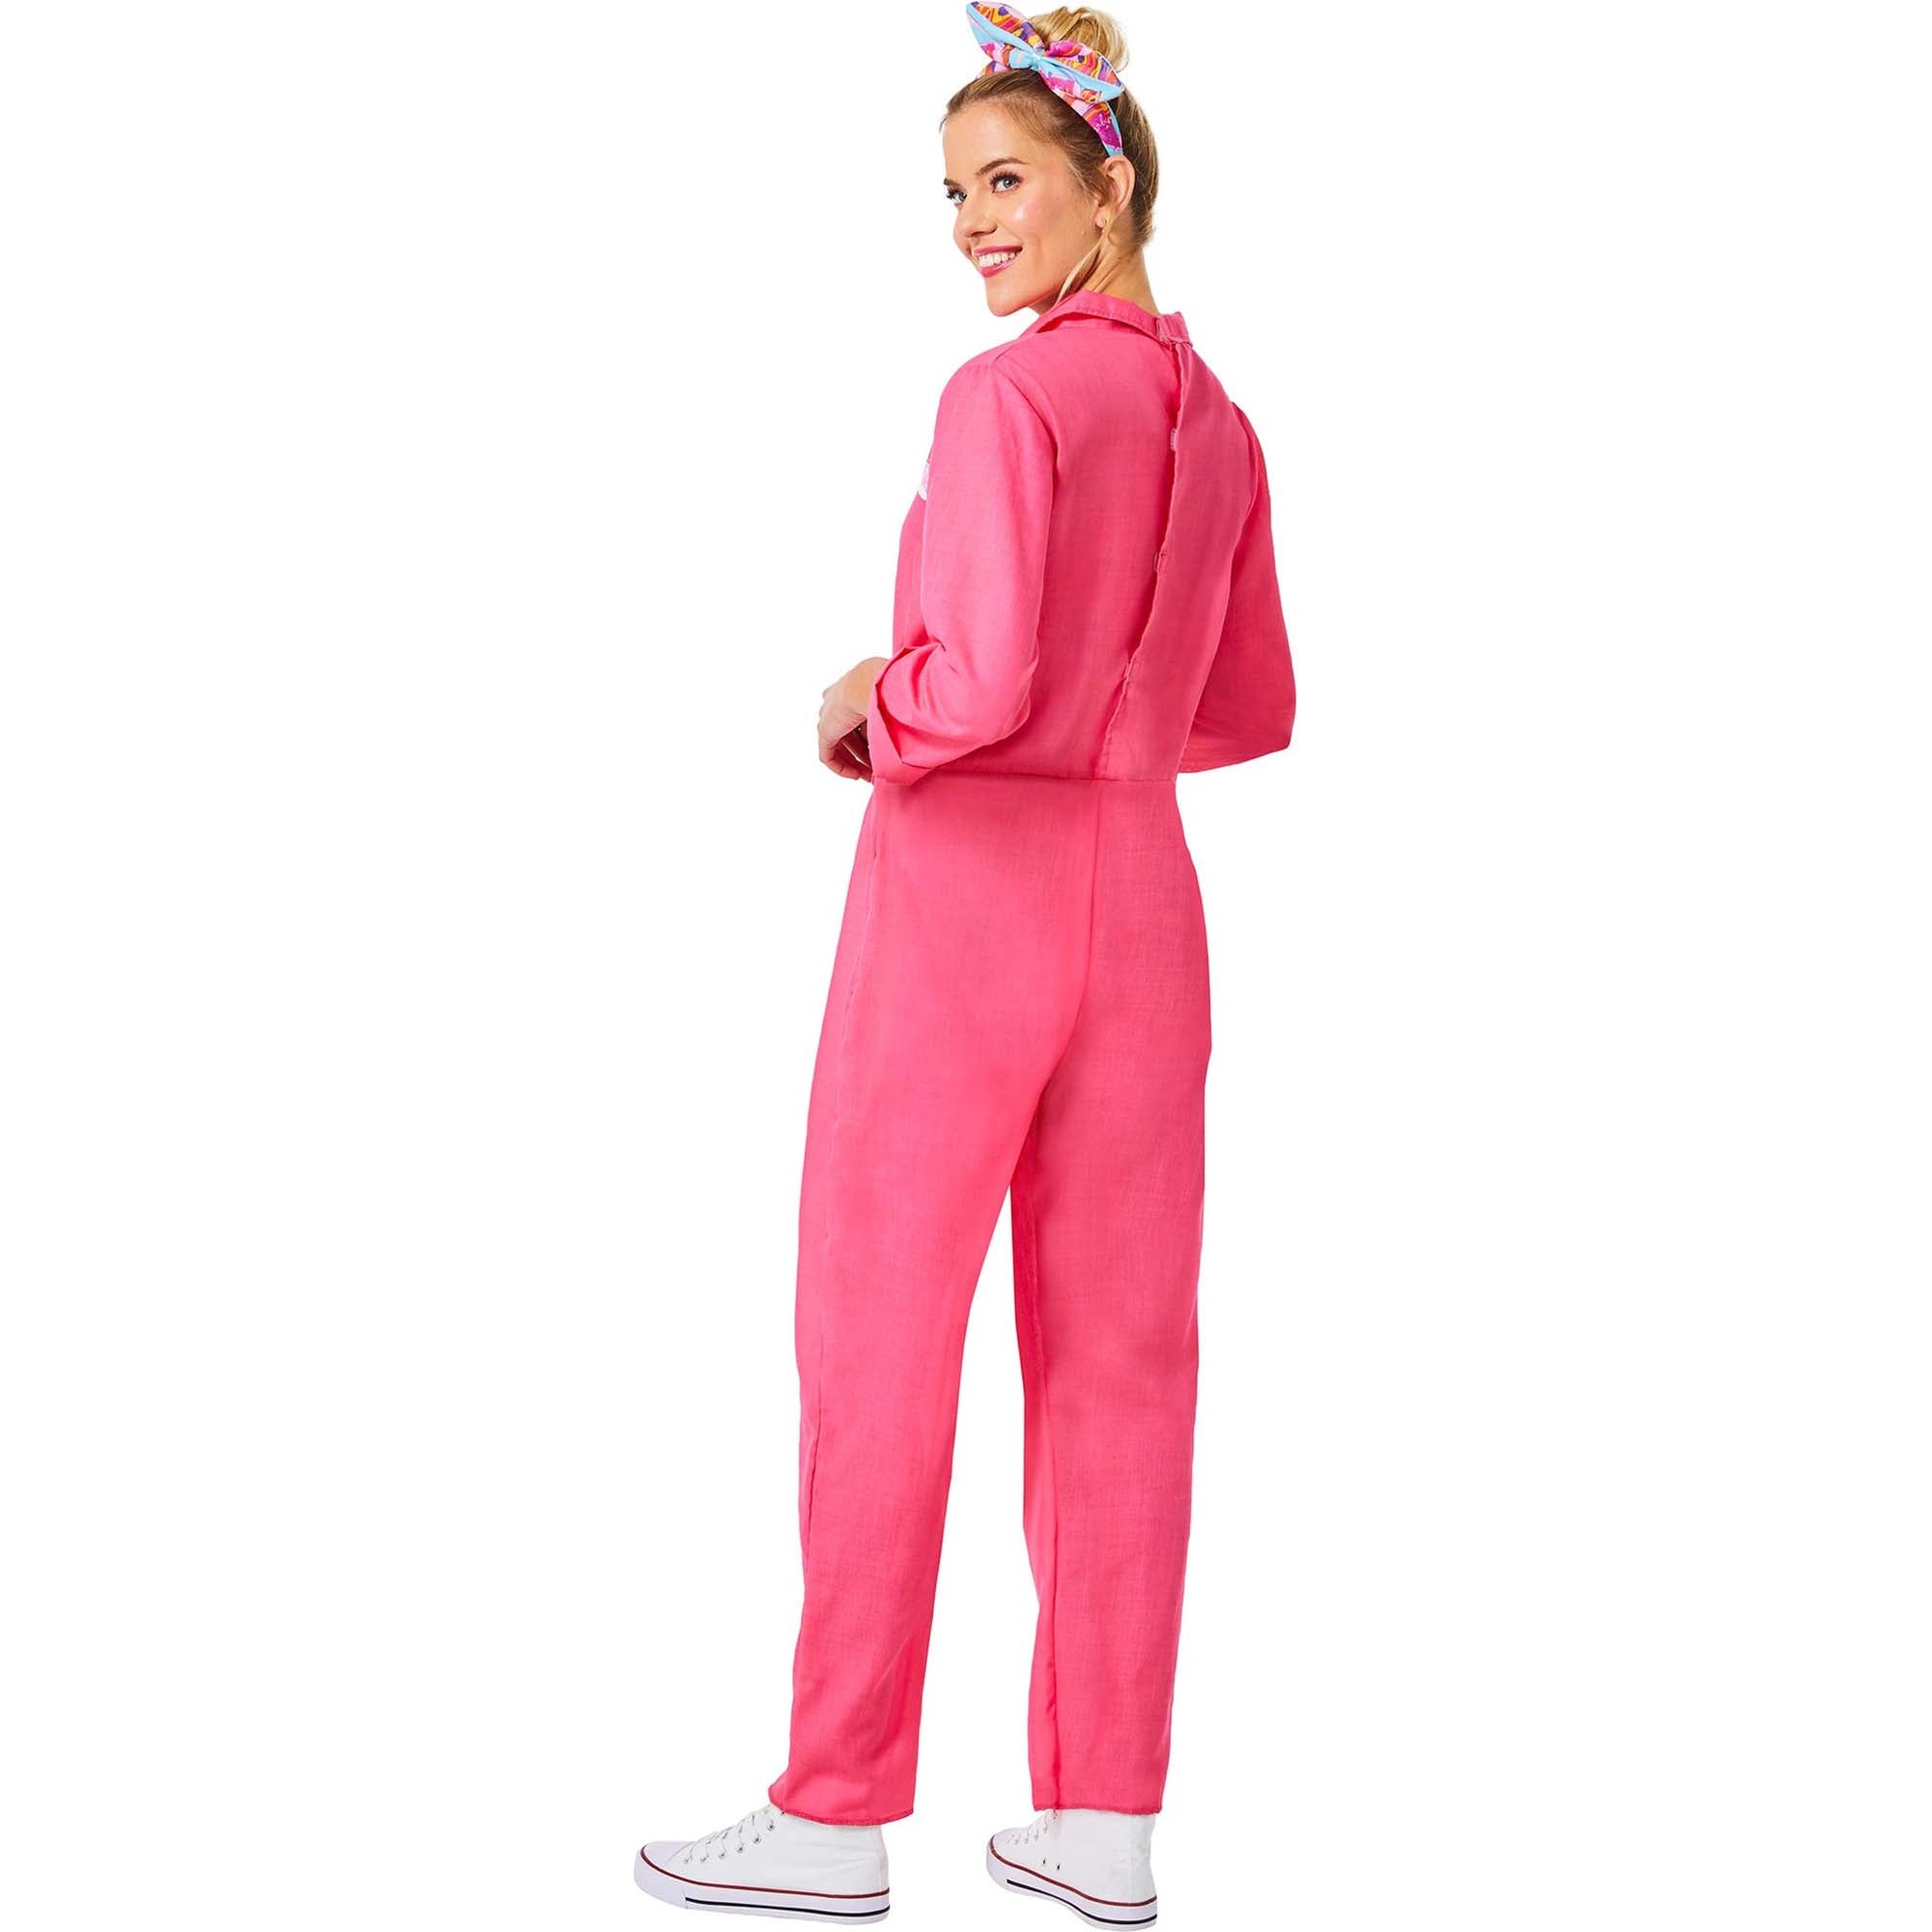 Barbie Pink Utility Jumpsuit Costume for Adults, Pink Jumpsuit and Headband